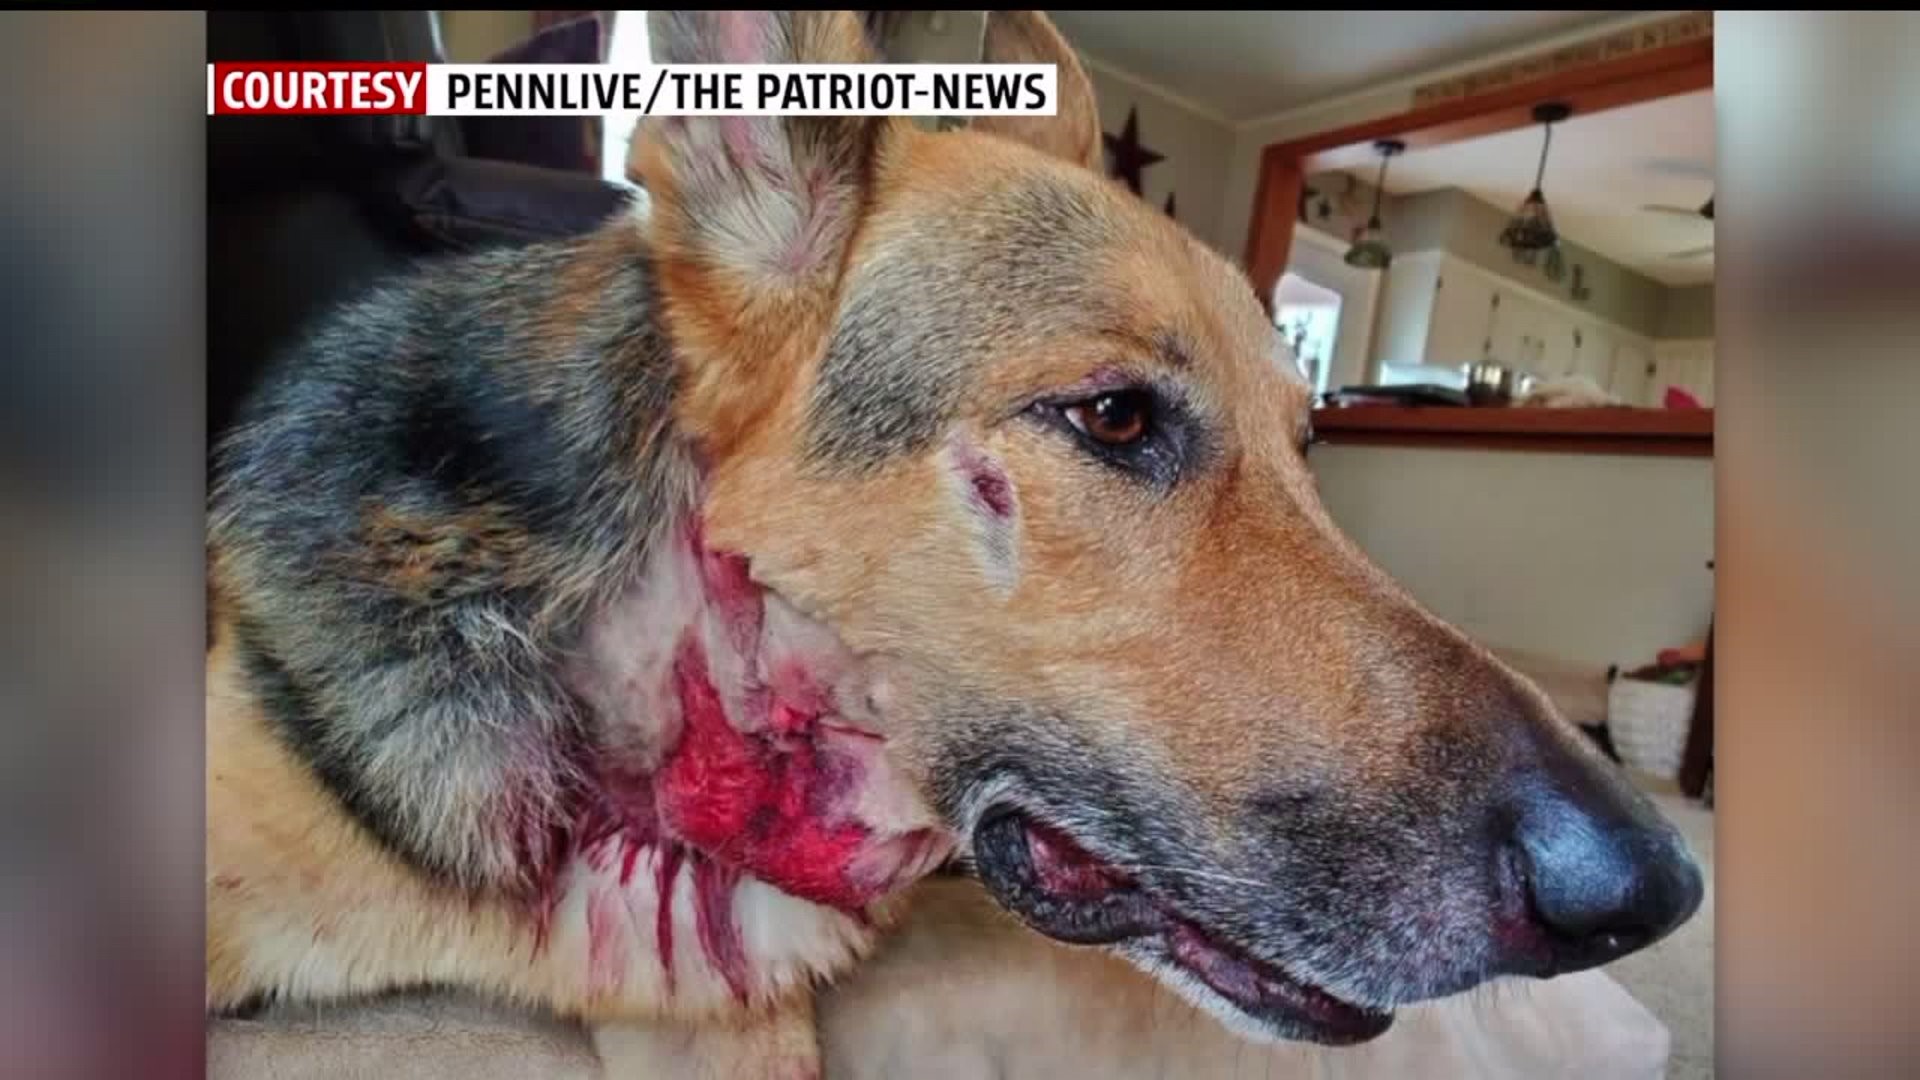 Bears spark warning across Dauphin County community after dog attack